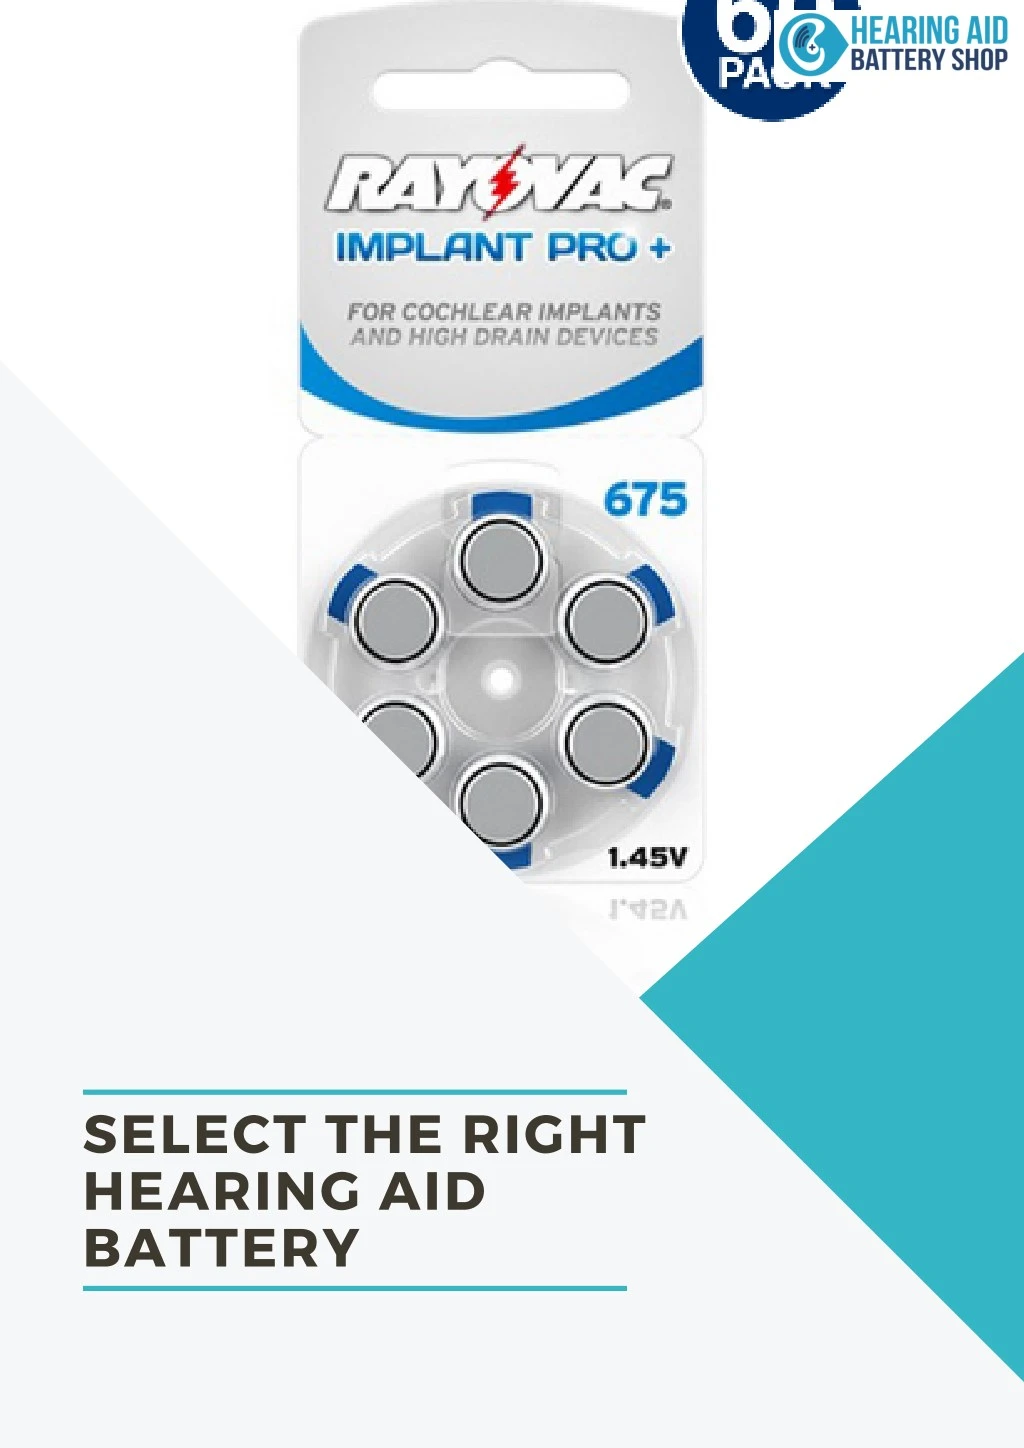 select the right hearing aid battery